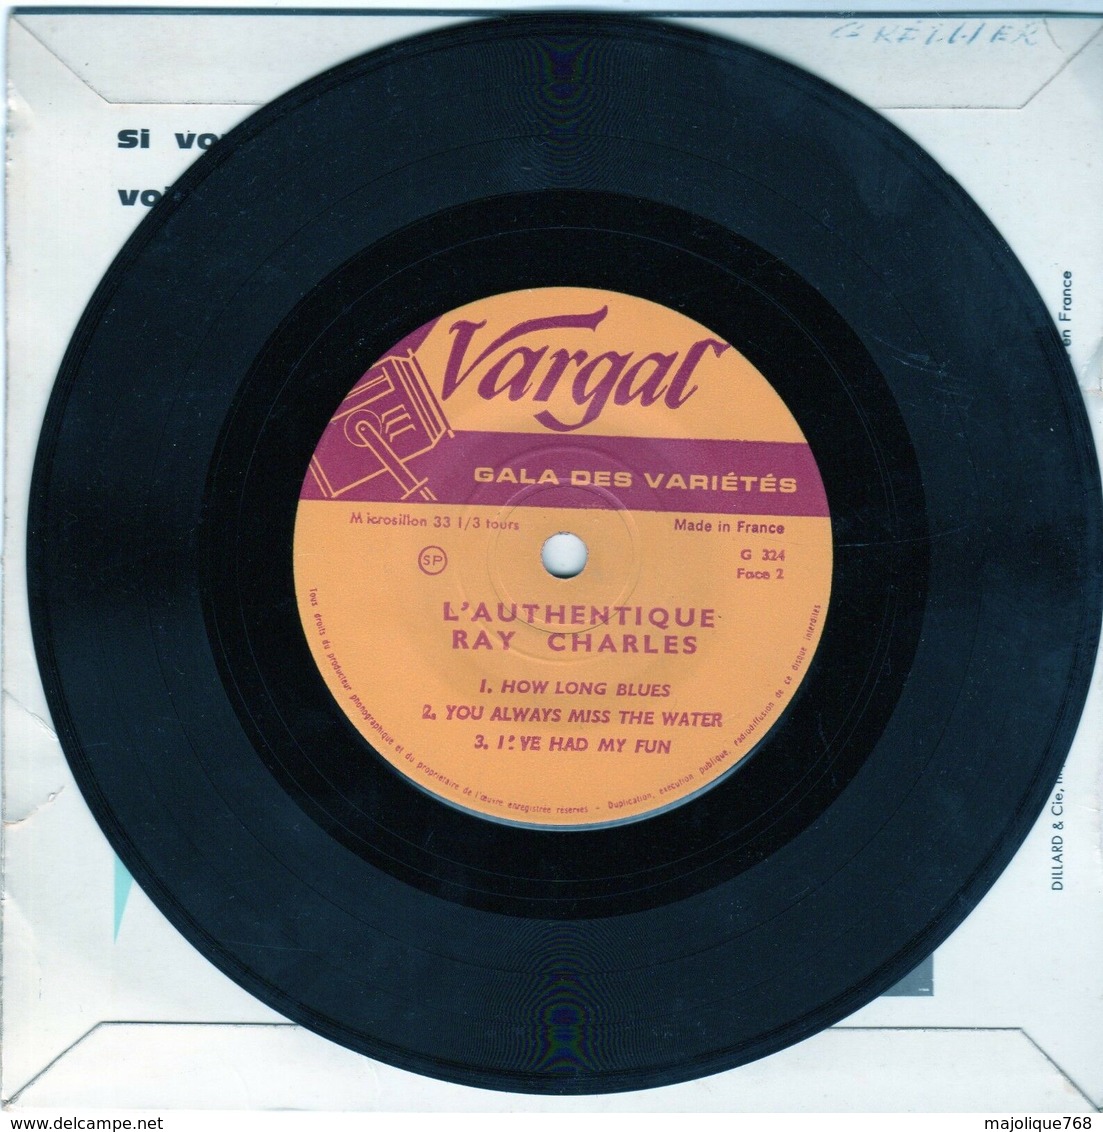 Disque De Ray Charles - Don't Put All Your Dreams - Vargal G 324 - 1962 - - Jazz